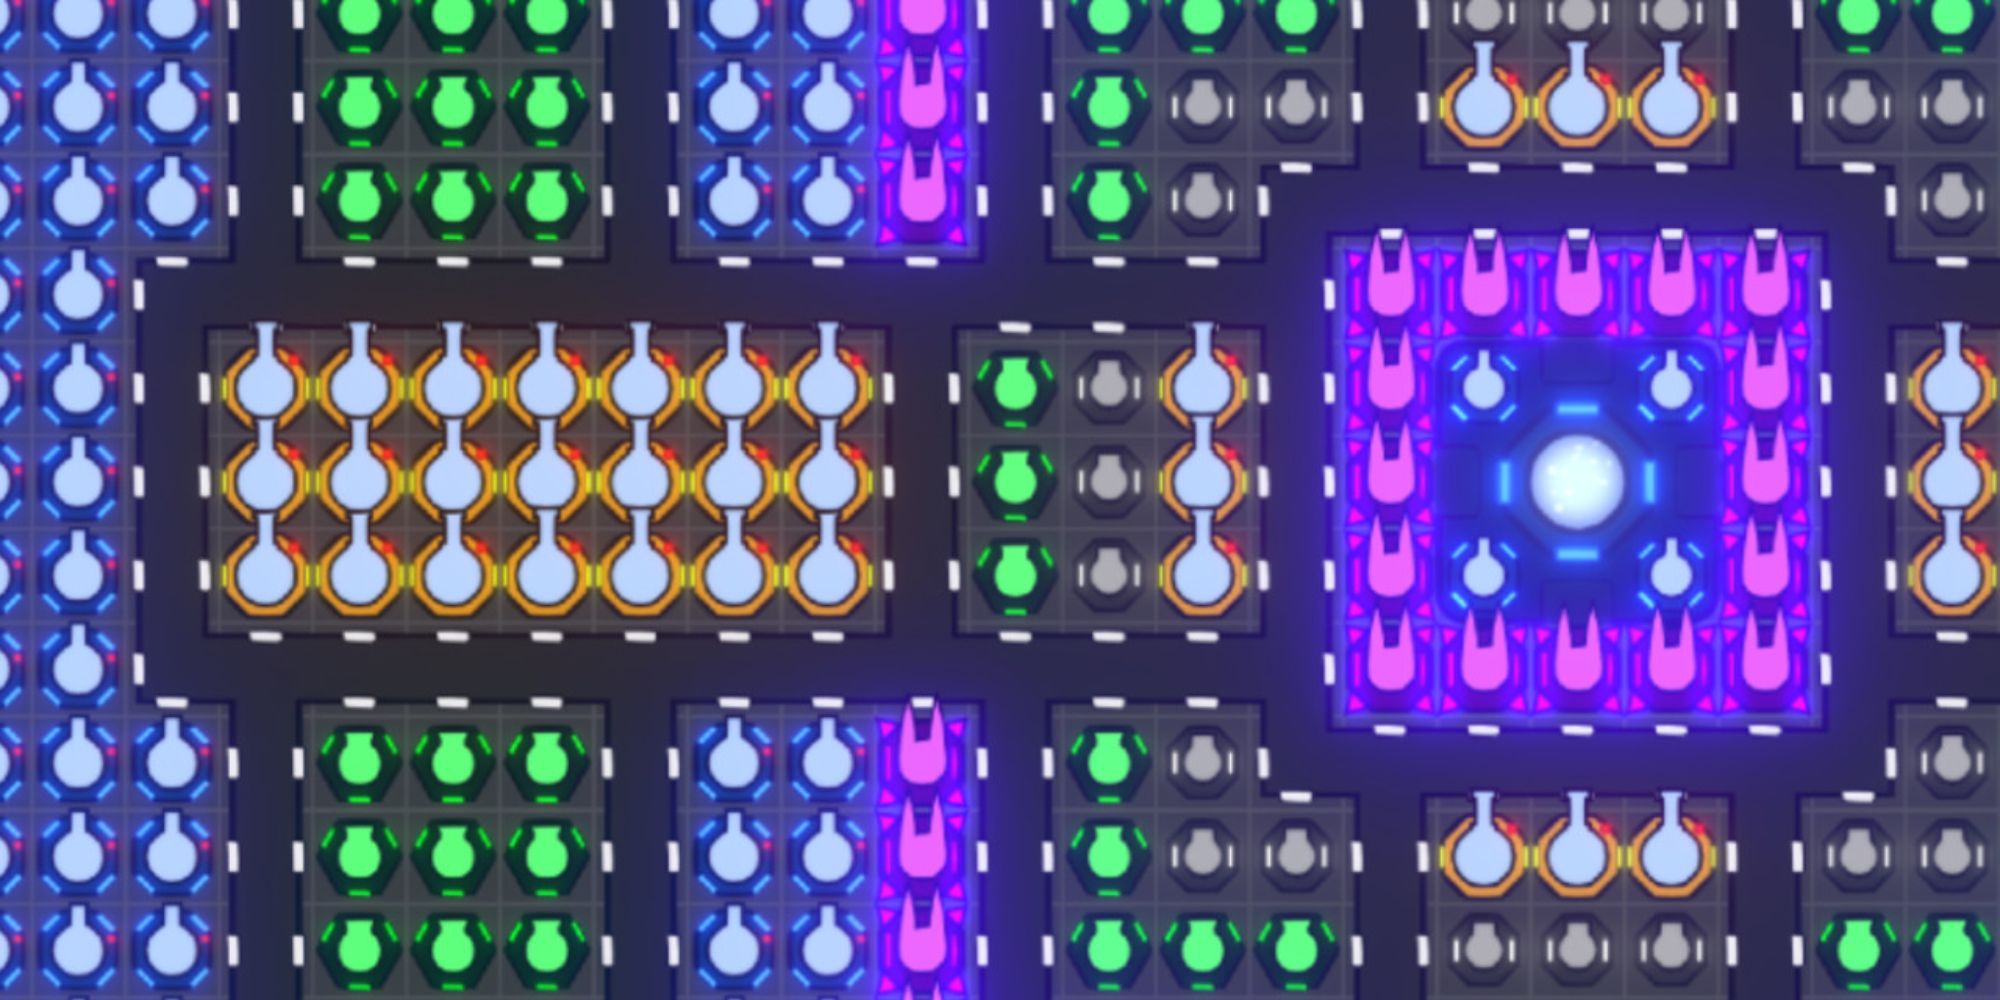 Vectorio vibrant screen of lights in grid